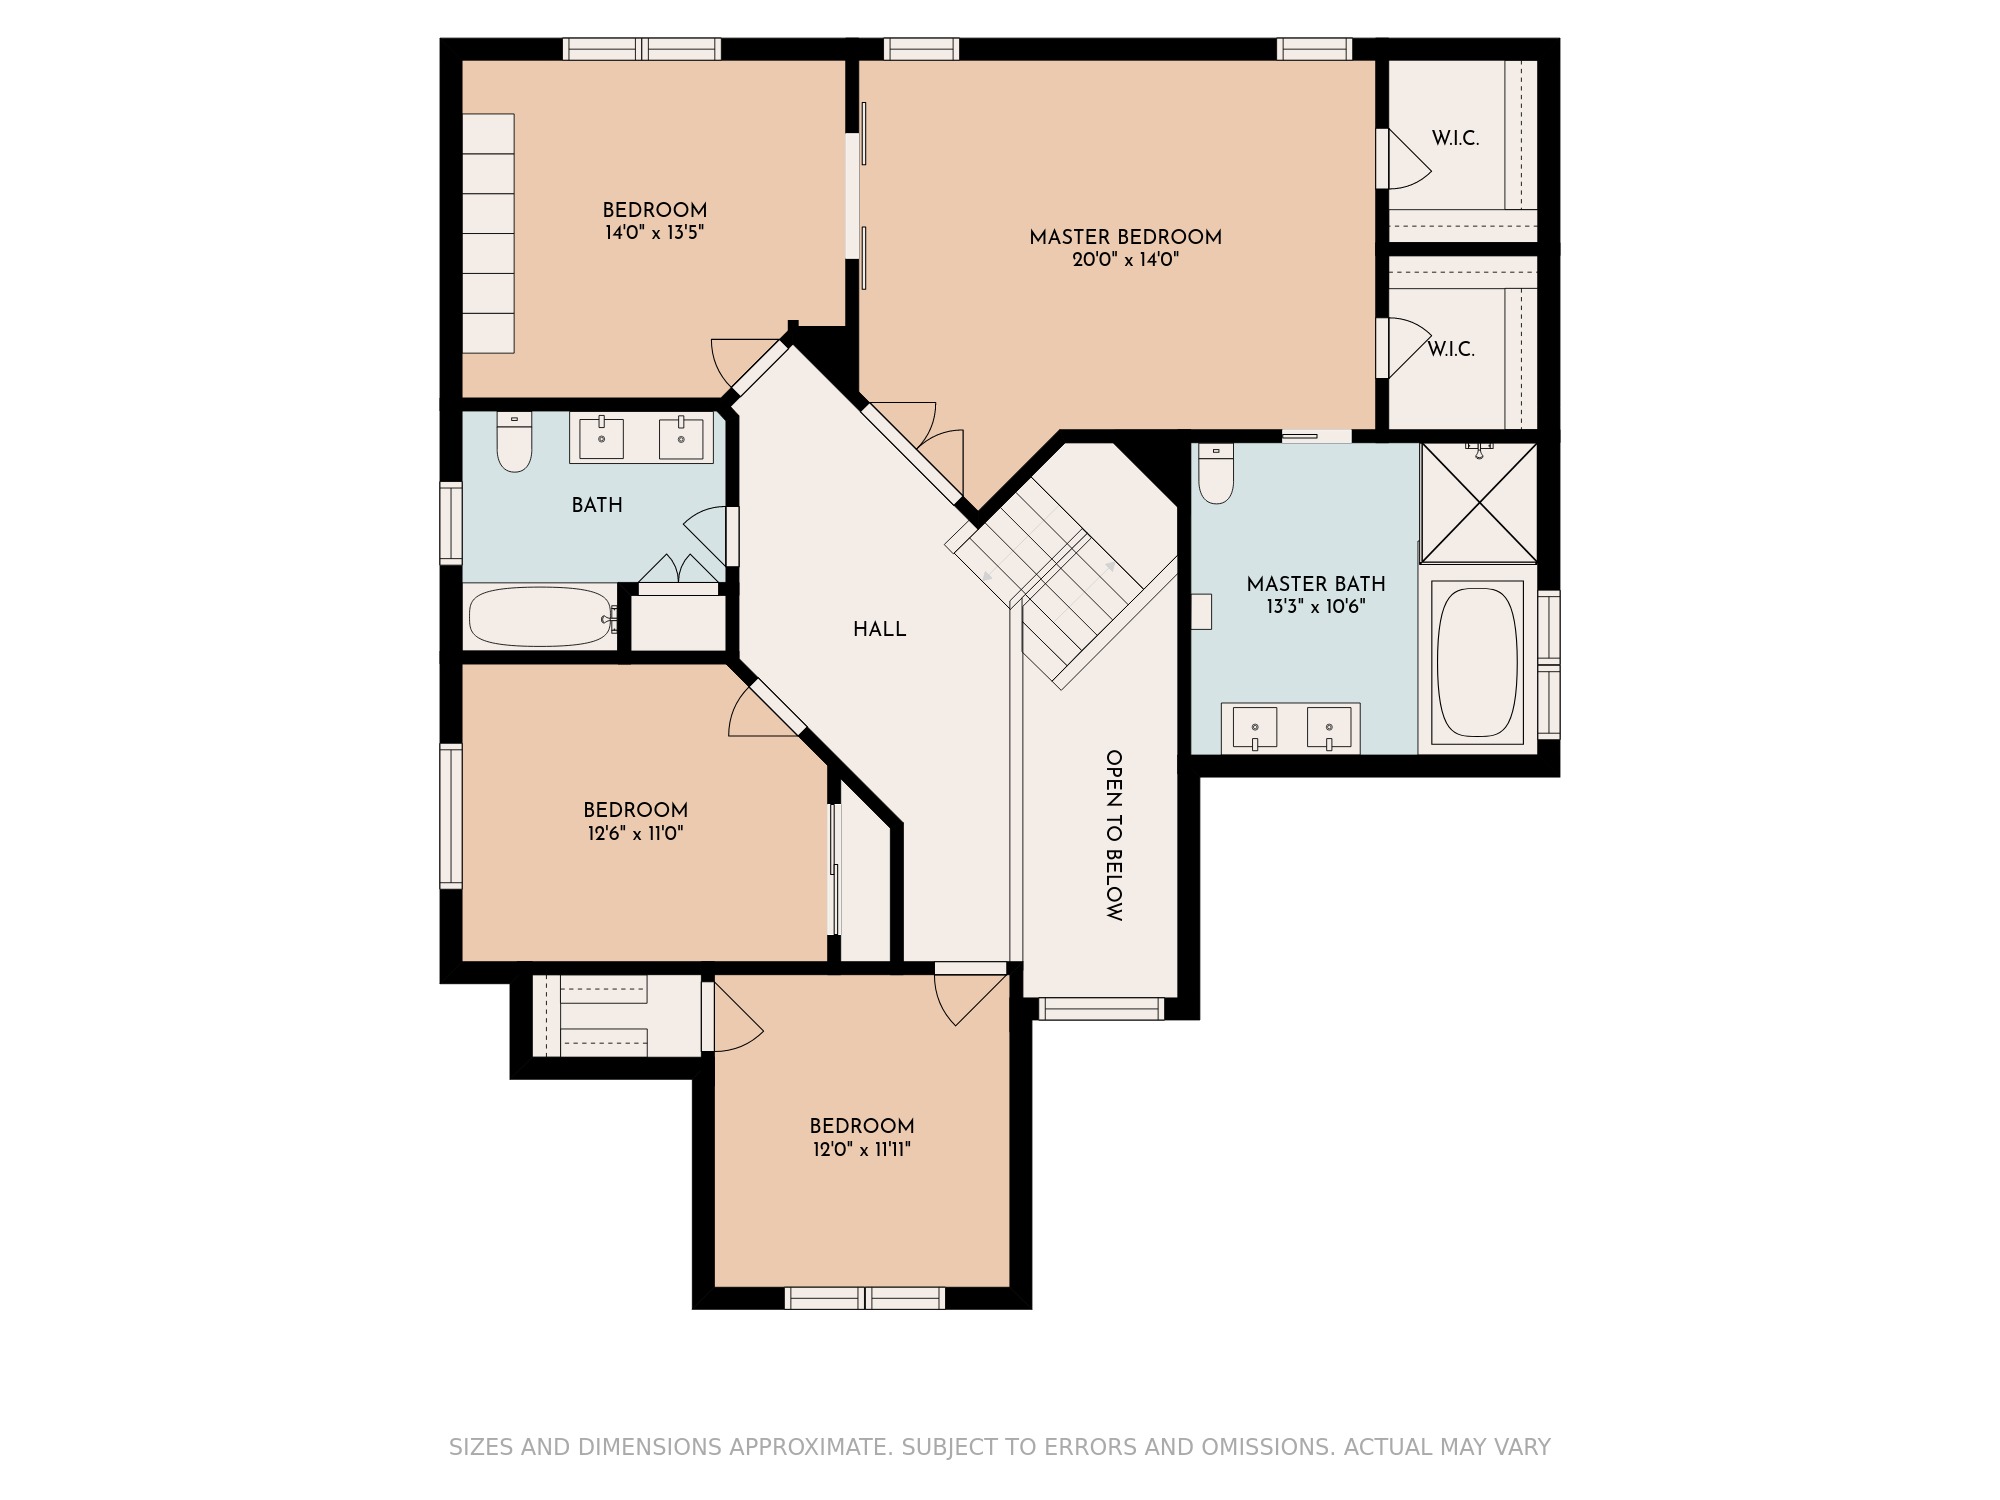 Floor plans for Real Estate Agents in Central New Jersey